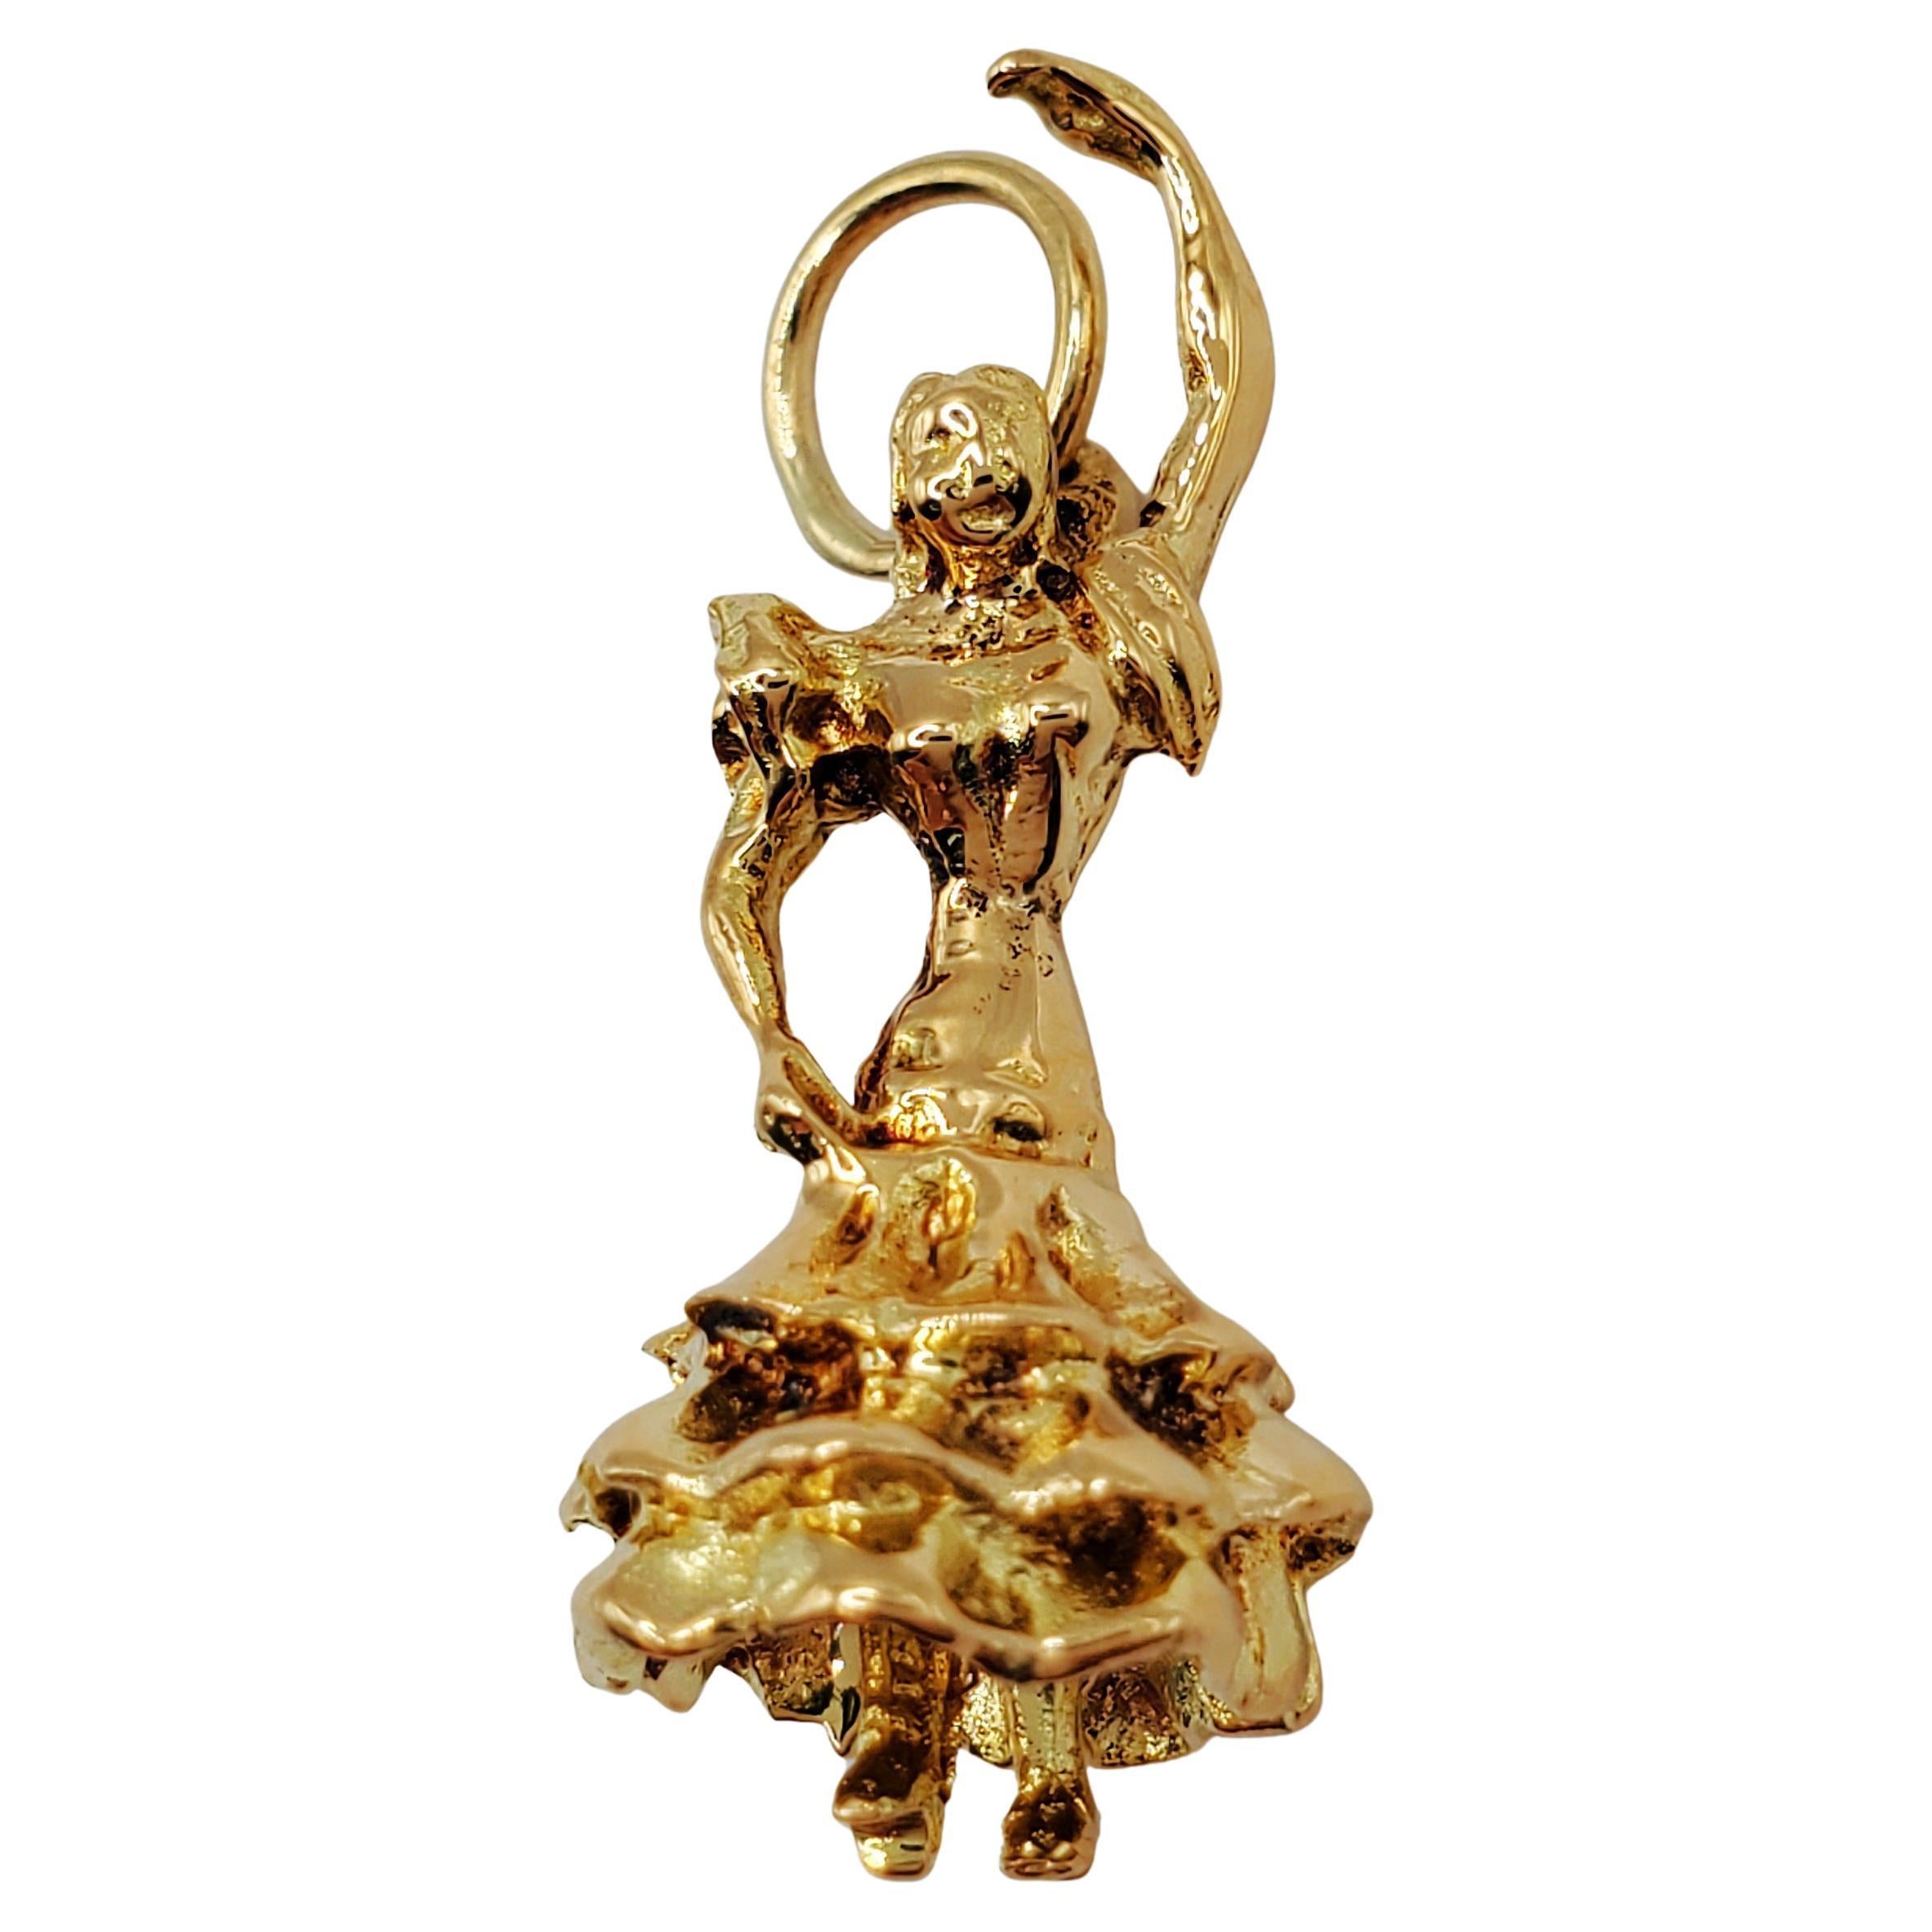 14K White Gold & Yellow Gold Polished Moveable Dancer Pendant Solid Pendants & Charms Jewelry 